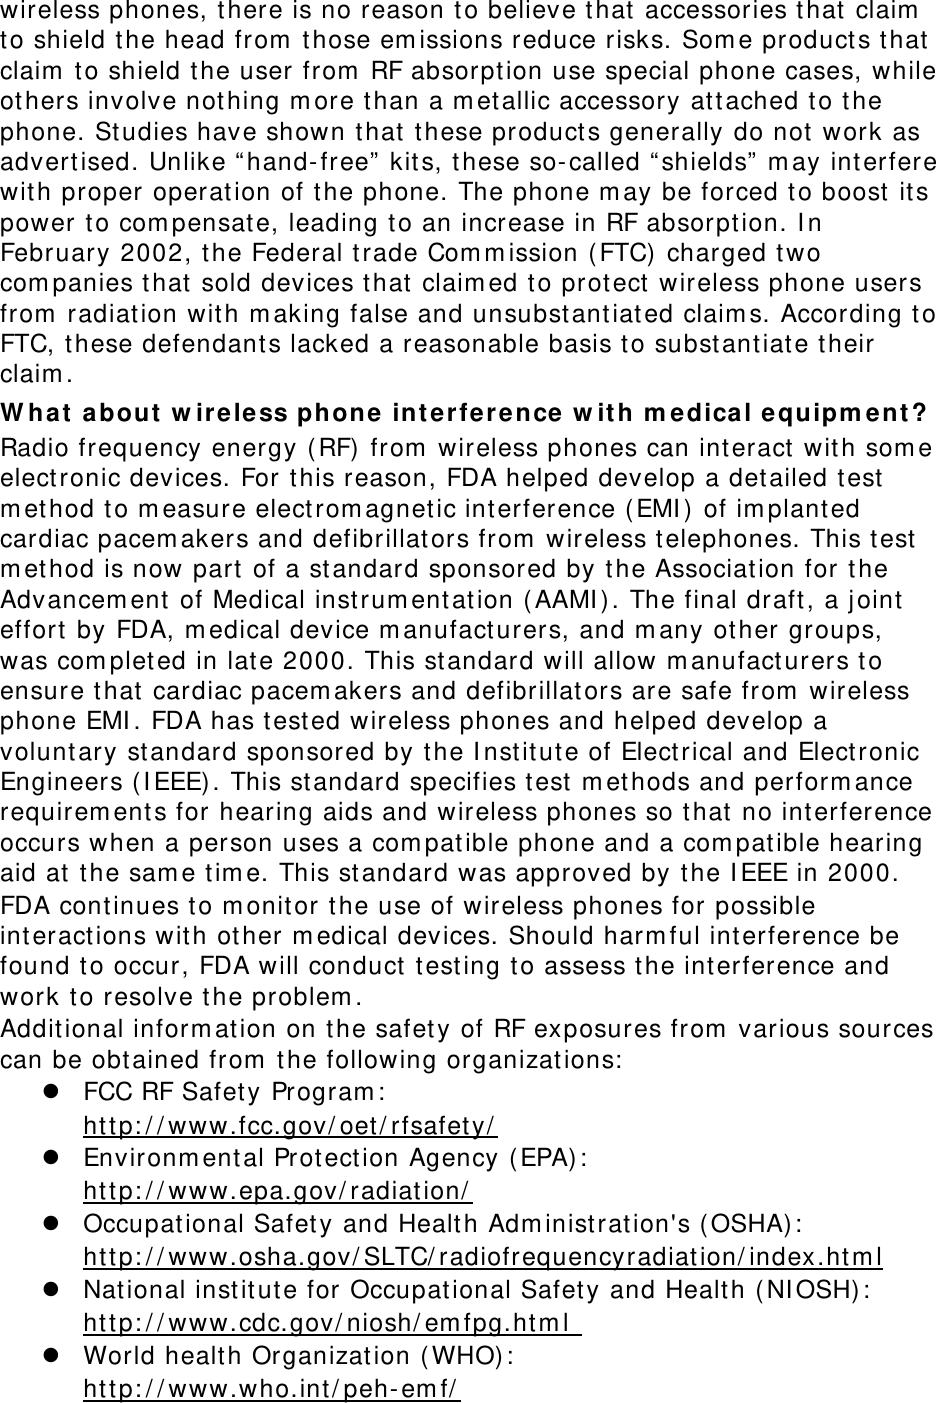 wireless phones, there is no reason t o believe that accessories t hat claim  to shield t he head from  t hose em issions reduce risks. Som e product s t hat claim  to shield t he user from  RF absorpt ion use special phone cases, while others involve nothing m ore t han a m etallic accessory att ached t o the phone. Studies have shown that t hese product s generally do not  work as advert ised. Unlike “ hand- free”  kits, t hese so-called “ shields”  m ay int erfere wit h proper operation of t he phone. The phone m ay be forced t o boost  its power t o com pensate, leading to an increase in RF absorpt ion. I n February 2002, t he Federal t rade Com m ission ( FTC) charged t wo com panies that sold devices that claim ed t o protect  wireless phone users from  radiation with m aking false and unsubst ant iat ed claim s. According t o FTC, these defendants lacked a reasonable basis t o substant iate their claim . W ha t a bout  w ireless phone int erference w it h m edica l equipm e nt ? Radio frequency energy ( RF) from  wireless phones can int eract  with som e elect ronic devices. For this reason, FDA helped develop a detailed t est  m ethod to m easure electrom agnet ic int erference ( EMI )  of im planted cardiac pacem akers and defibrillat ors from  wireless t elephones. This t est  m ethod is now part  of a st andard sponsored by t he Association for t he Advancem ent  of Medical inst rum ent ation ( AAMI ) . The final draft , a j oint  effort  by FDA, m edical device m anufact urers, and m any other groups, was com pleted in late 2000. This st andard will allow m anufact urers t o ensure t hat cardiac pacem akers and defibrillat ors are safe from  wireless phone EMI . FDA has t est ed wireless phones and helped develop a volunt ary st andard sponsored by t he I nst it ut e of Elect rical and Electronic Engineers ( I EEE) . This st andard specifies t est  m ethods and perform ance requirem ents for hearing aids and wireless phones so that no interference occurs when a person uses a com patible phone and a com patible hearing aid at the sam e t im e. This st andard was approved by t he I EEE in 2000. FDA cont inues t o m onitor t he use of wireless phones for possible int eract ions wit h other m edical devices. Should harm ful interference be found t o occur, FDA will conduct  t est ing t o assess t he int erference and work t o resolve the problem . Additional inform ation on t he safety of RF exposures from  various sources can be obt ained from  the following organizat ions:  z FCC RF Safet y Program :   ht t p: / / www.fcc.gov/ oet / rfsafety/  z Environm ent al Prot ect ion Agency ( EPA) :   ht t p: / / www.epa.gov/ radiat ion/  z Occupational Safet y and Health Adm inist ration&apos;s ( OSHA) :          ht tp: / / www.osha.gov/ SLTC/ radiofrequencyradiat ion/ index.ht m l z National inst itut e for Occupational Safety and Healt h ( NI OSH):   ht t p: / / www.cdc.gov/ niosh/ em fpg.htm l  z World health Organization ( WHO) :   ht t p: / / www.who.int / peh- em f/  